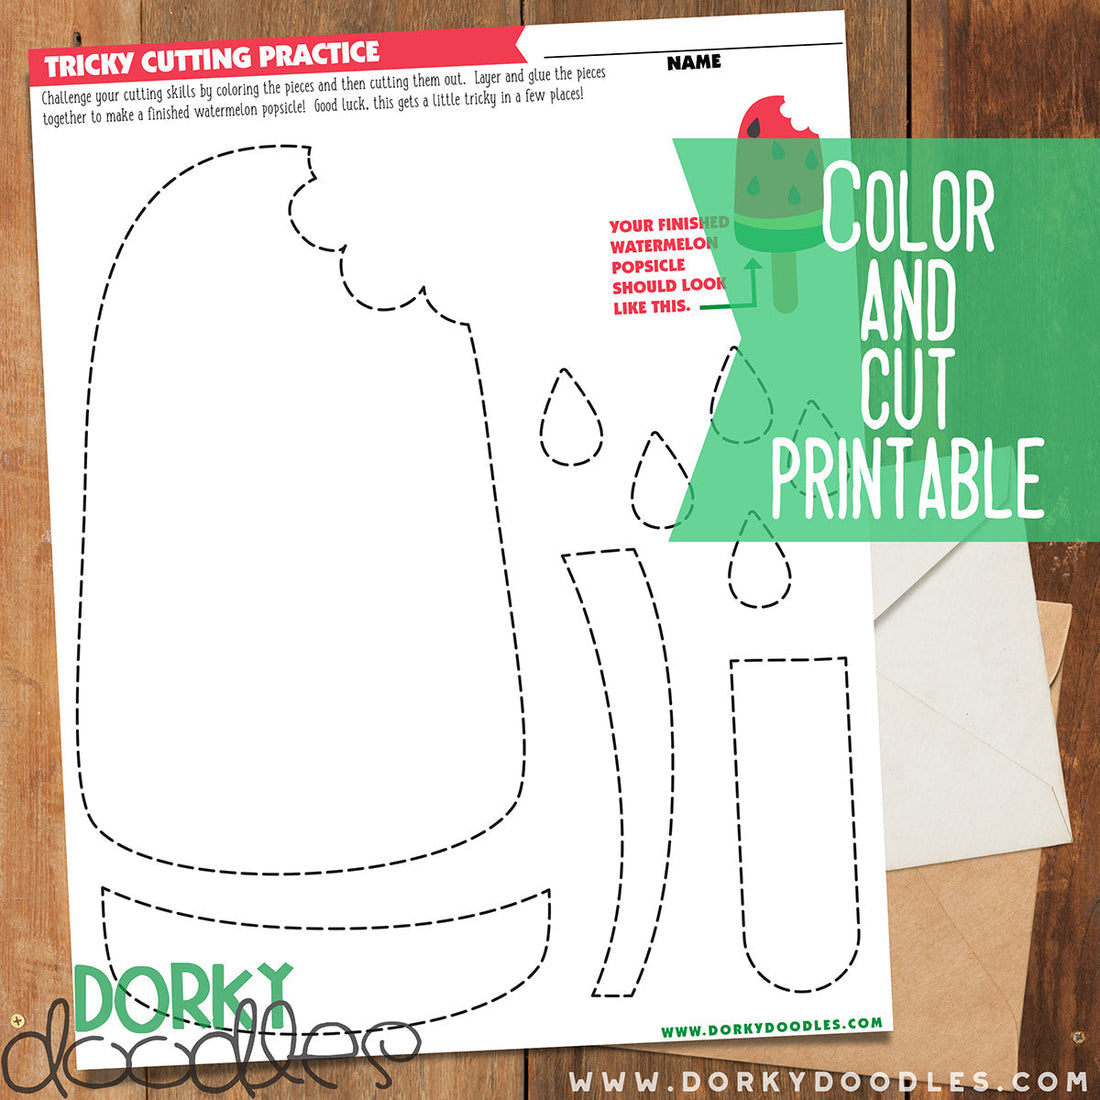 Tricky Cutting Practice Worksheet - Fun Summer Activity - Dorky Doodles